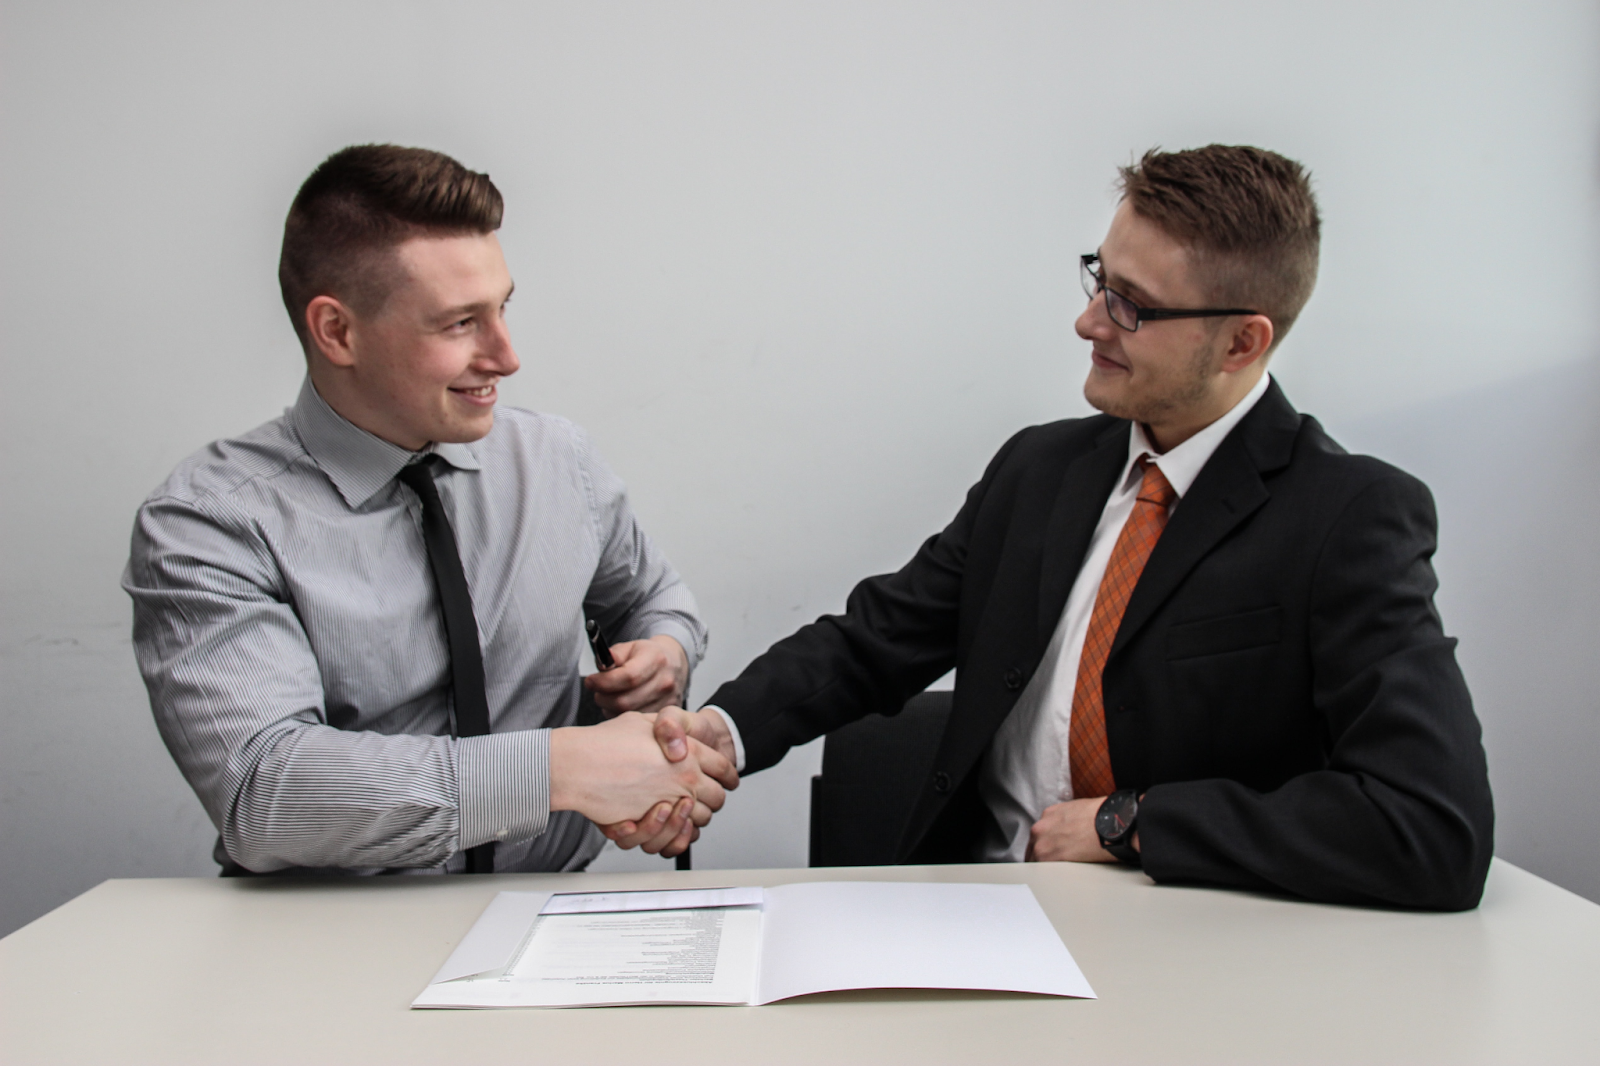 two employees agreeing on something through a handshake turnover